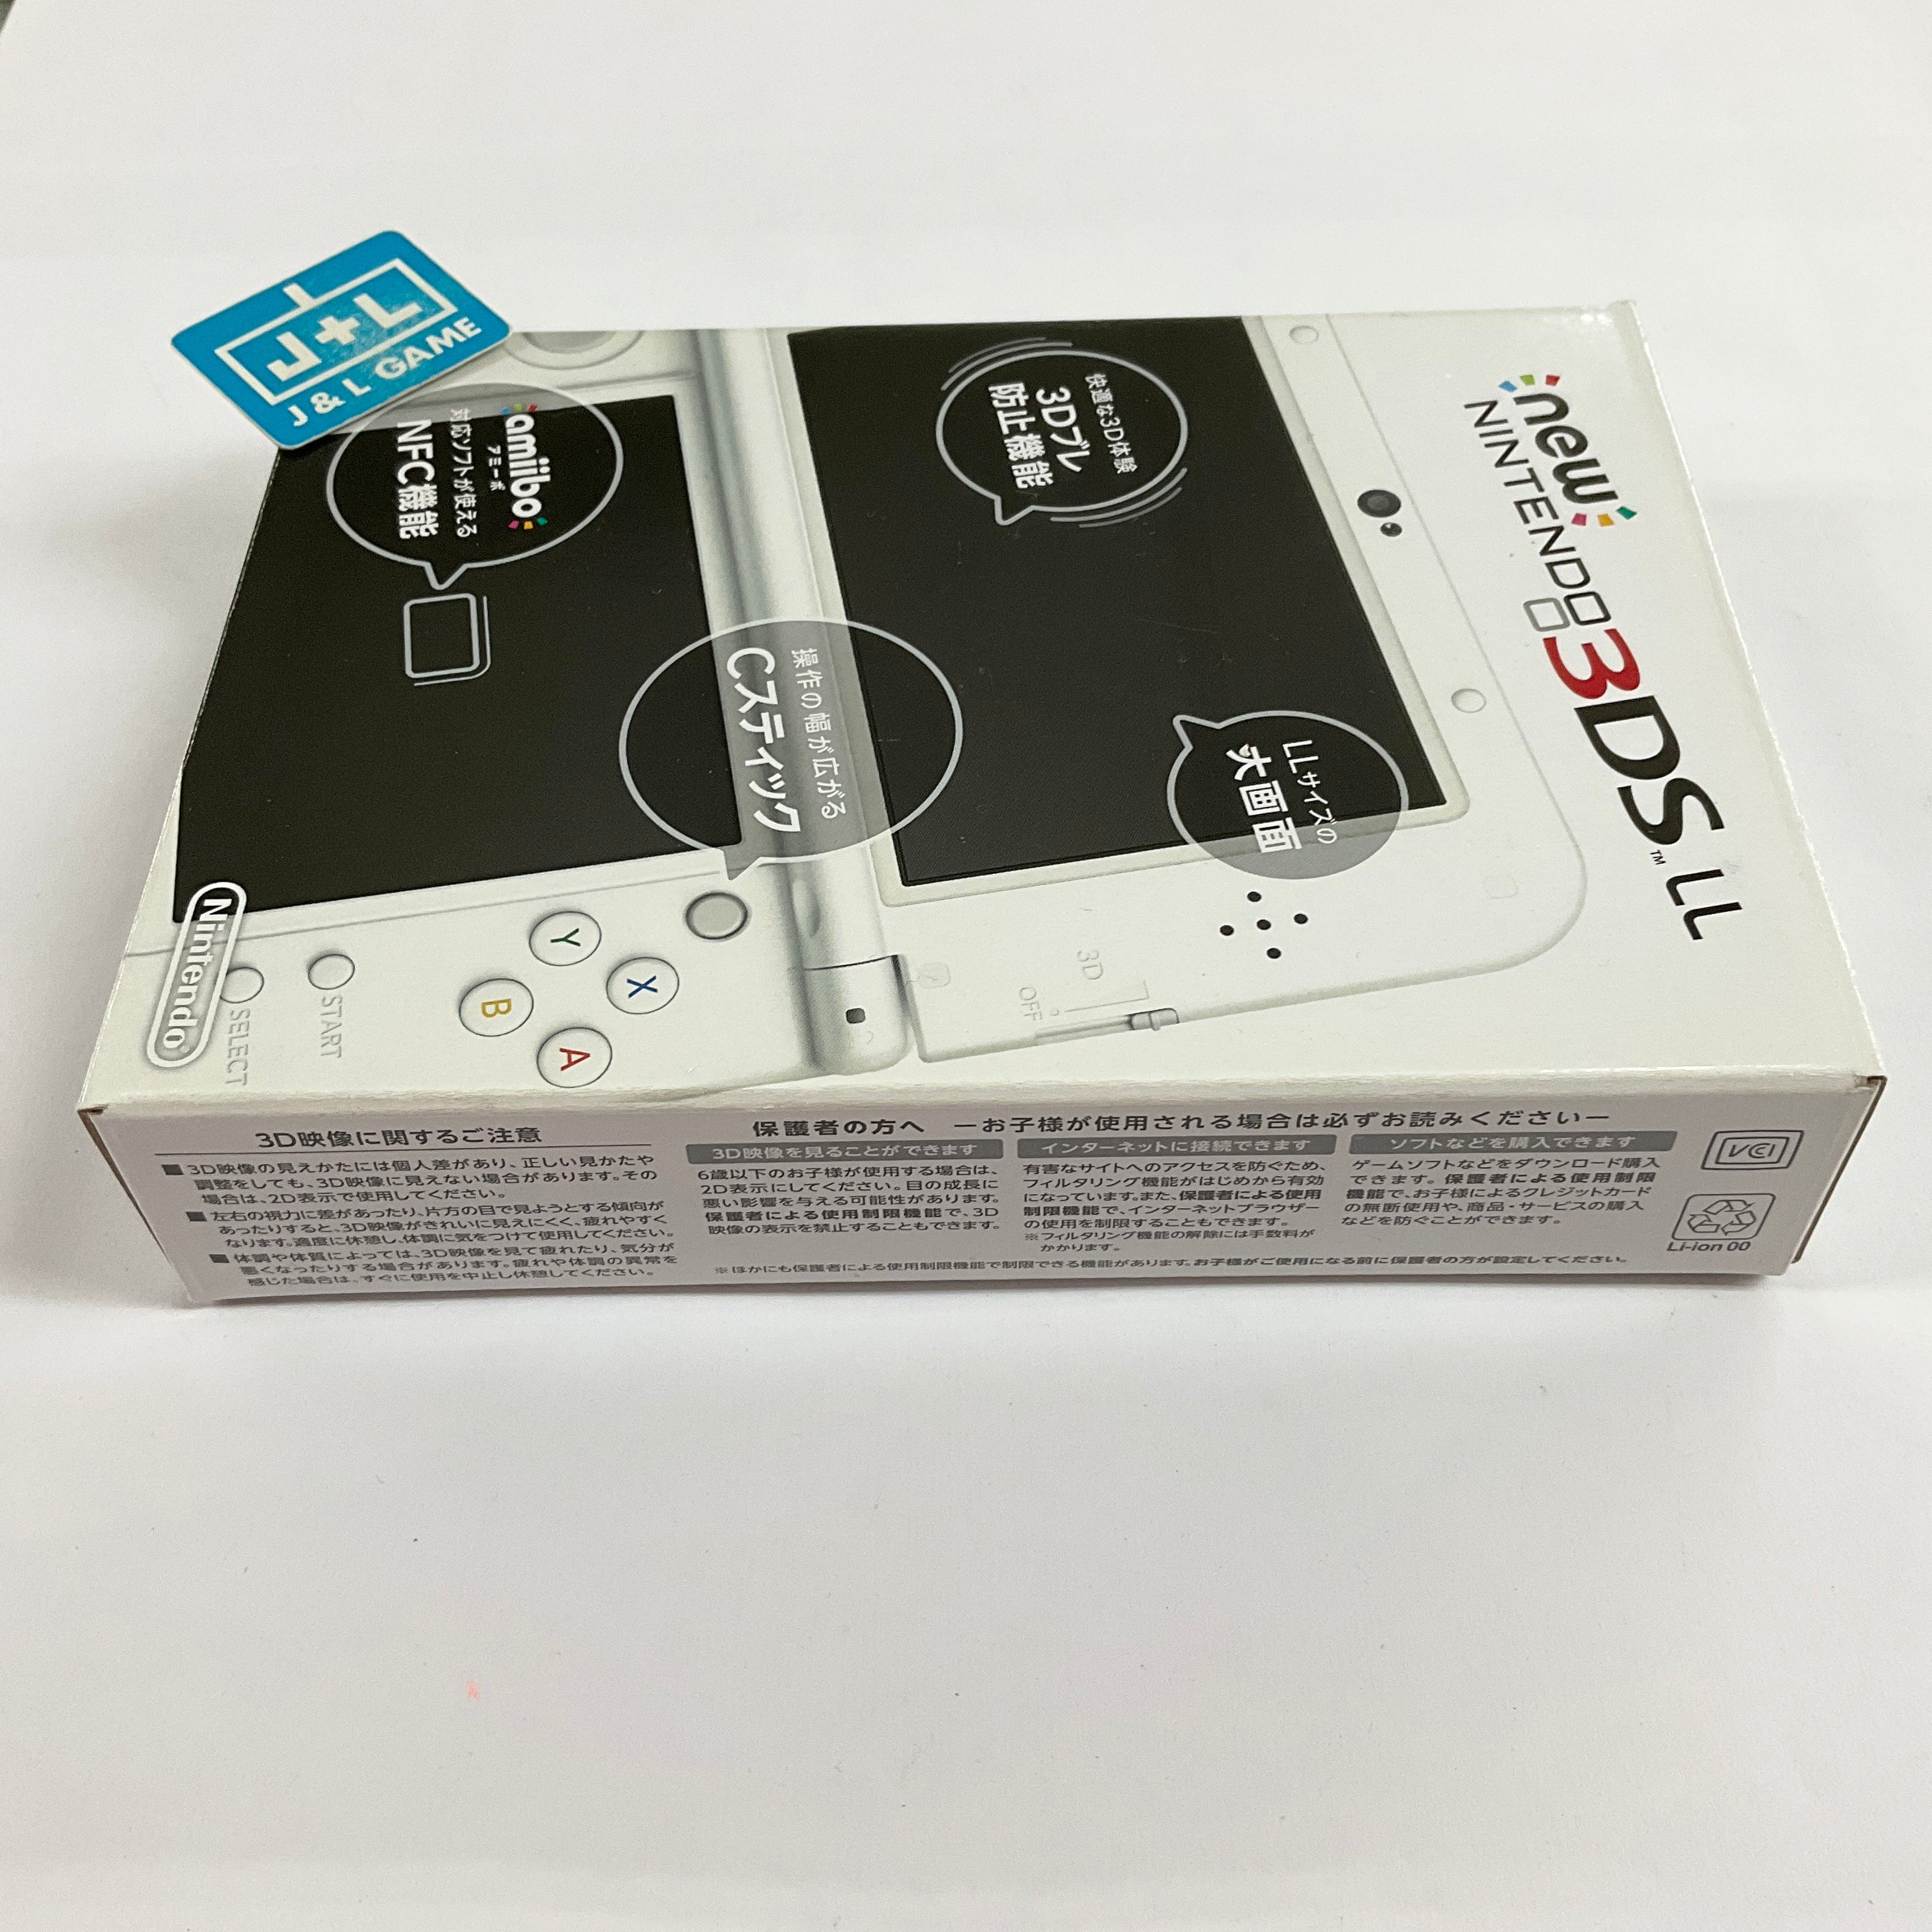 NEW New Nintendo 2DS LL Console System (Pearl White) - Nintendo 3DS [Pre-Owned] (Japanese Import) CONSOLE Nintendo   